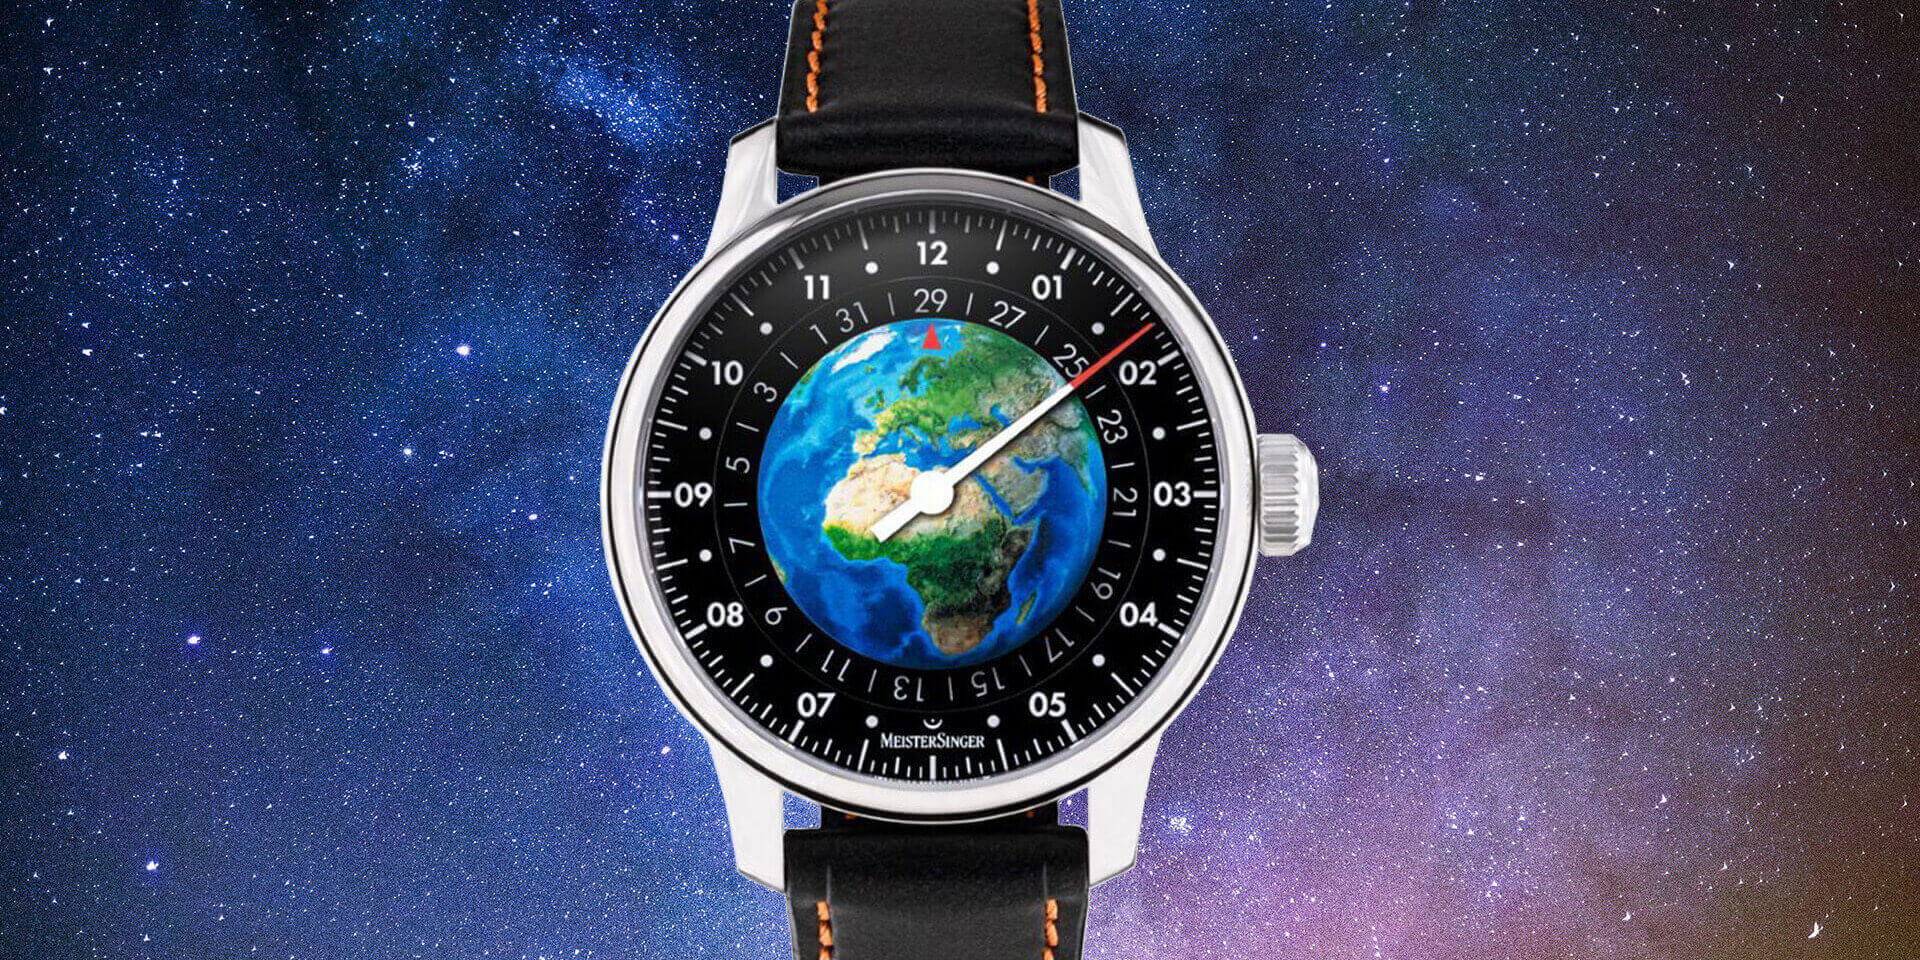 MeisterSinger Cooperates with WWF and Launches “Planet Earth” Edition